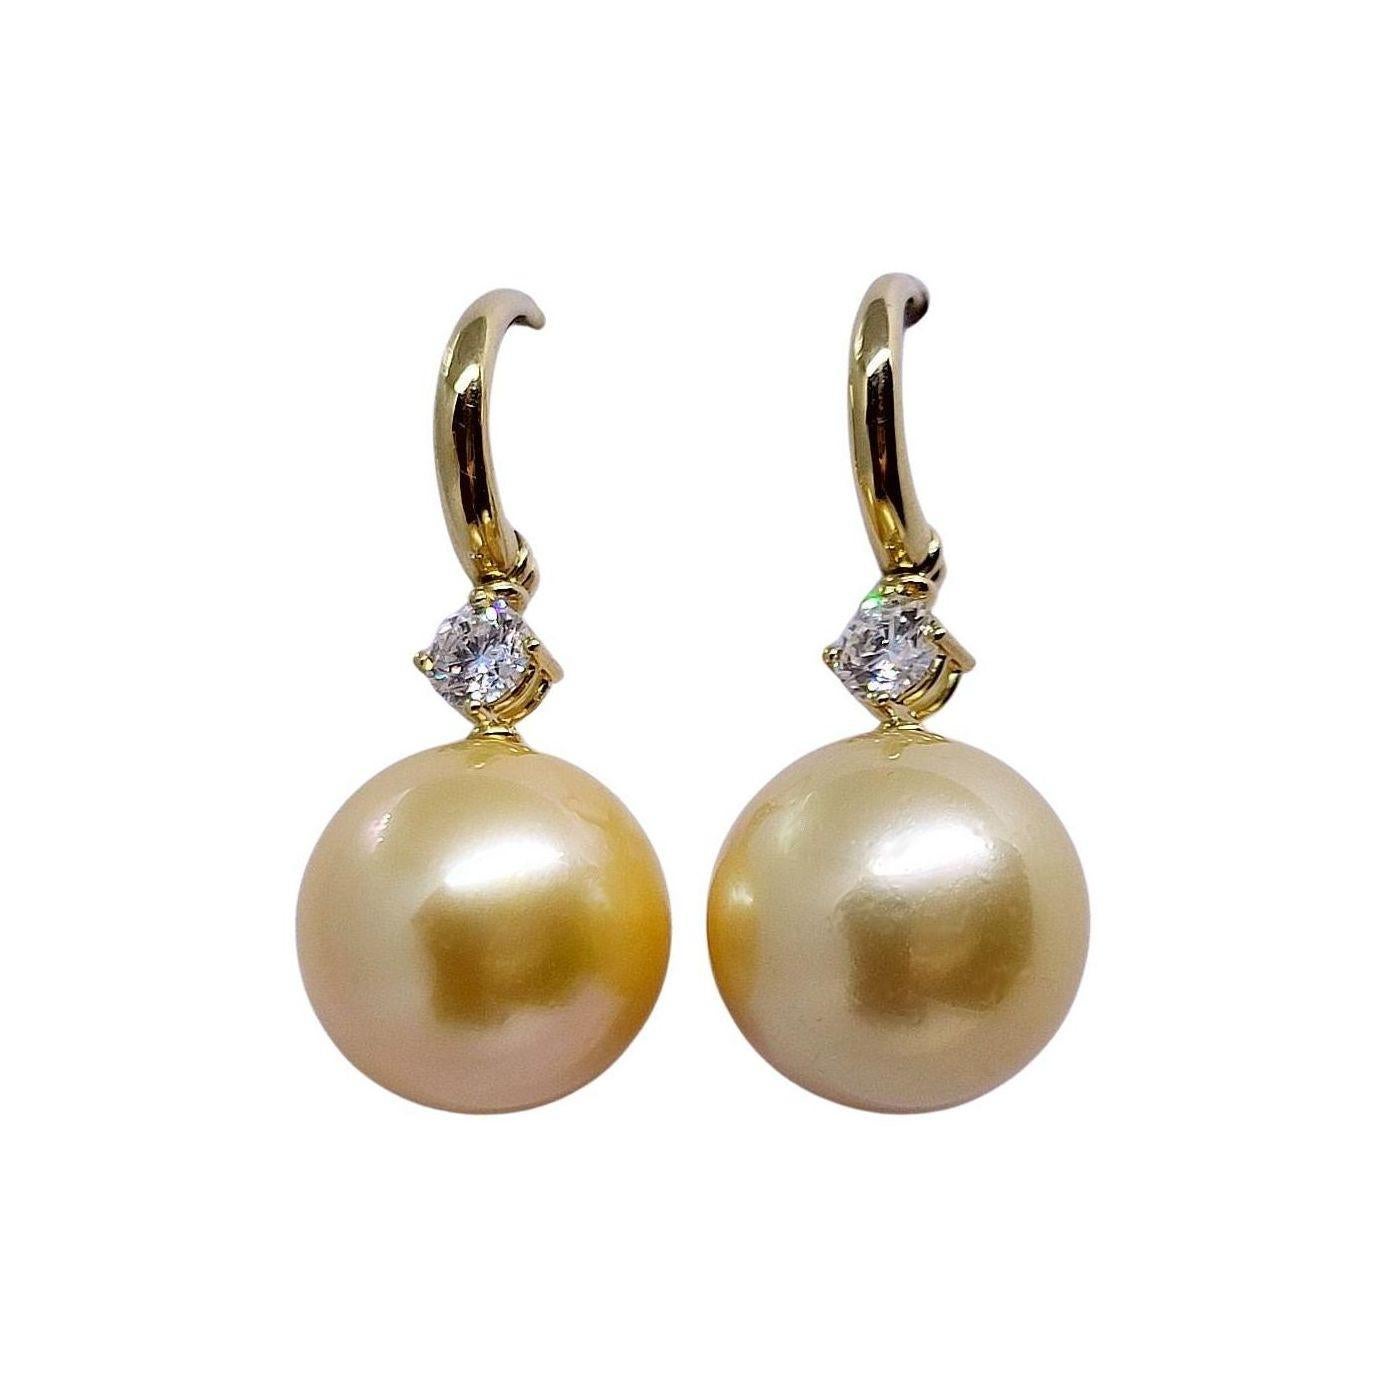 Beautifully crafted earrings by Wagner Preziosen that combine the warmth of golden South Sea Pearls with the coolness of white diamonds. The pearls have a diameter of 13,90 mm / 15.35 inches and excellent lustre.
Both diamonds have GIA